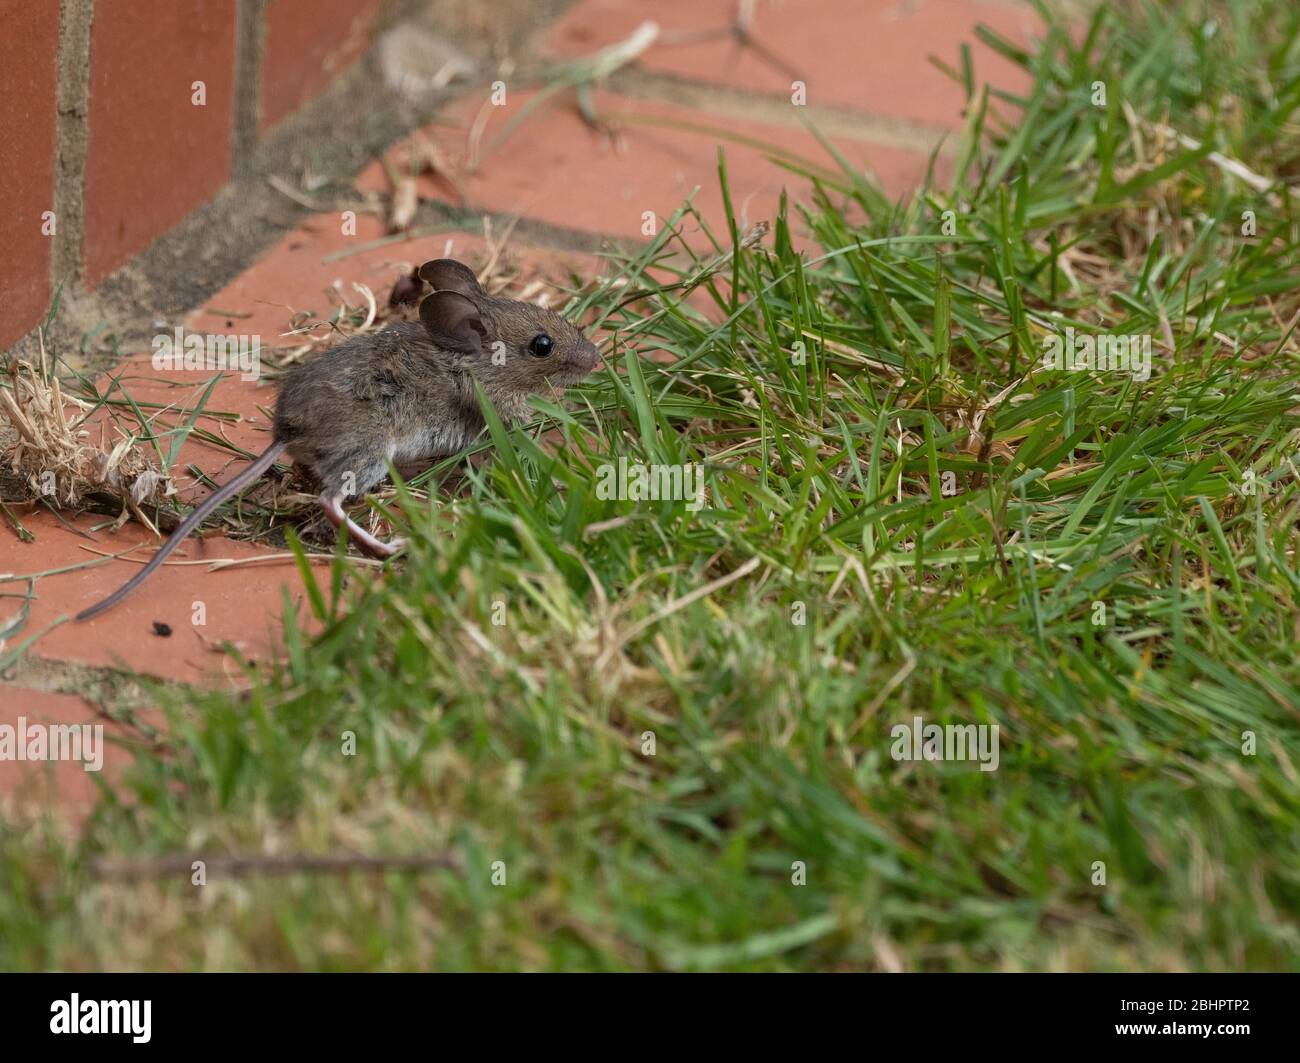 A field or wood mouse, Apodemus sylvaticus, in a London garden. Stock Photo